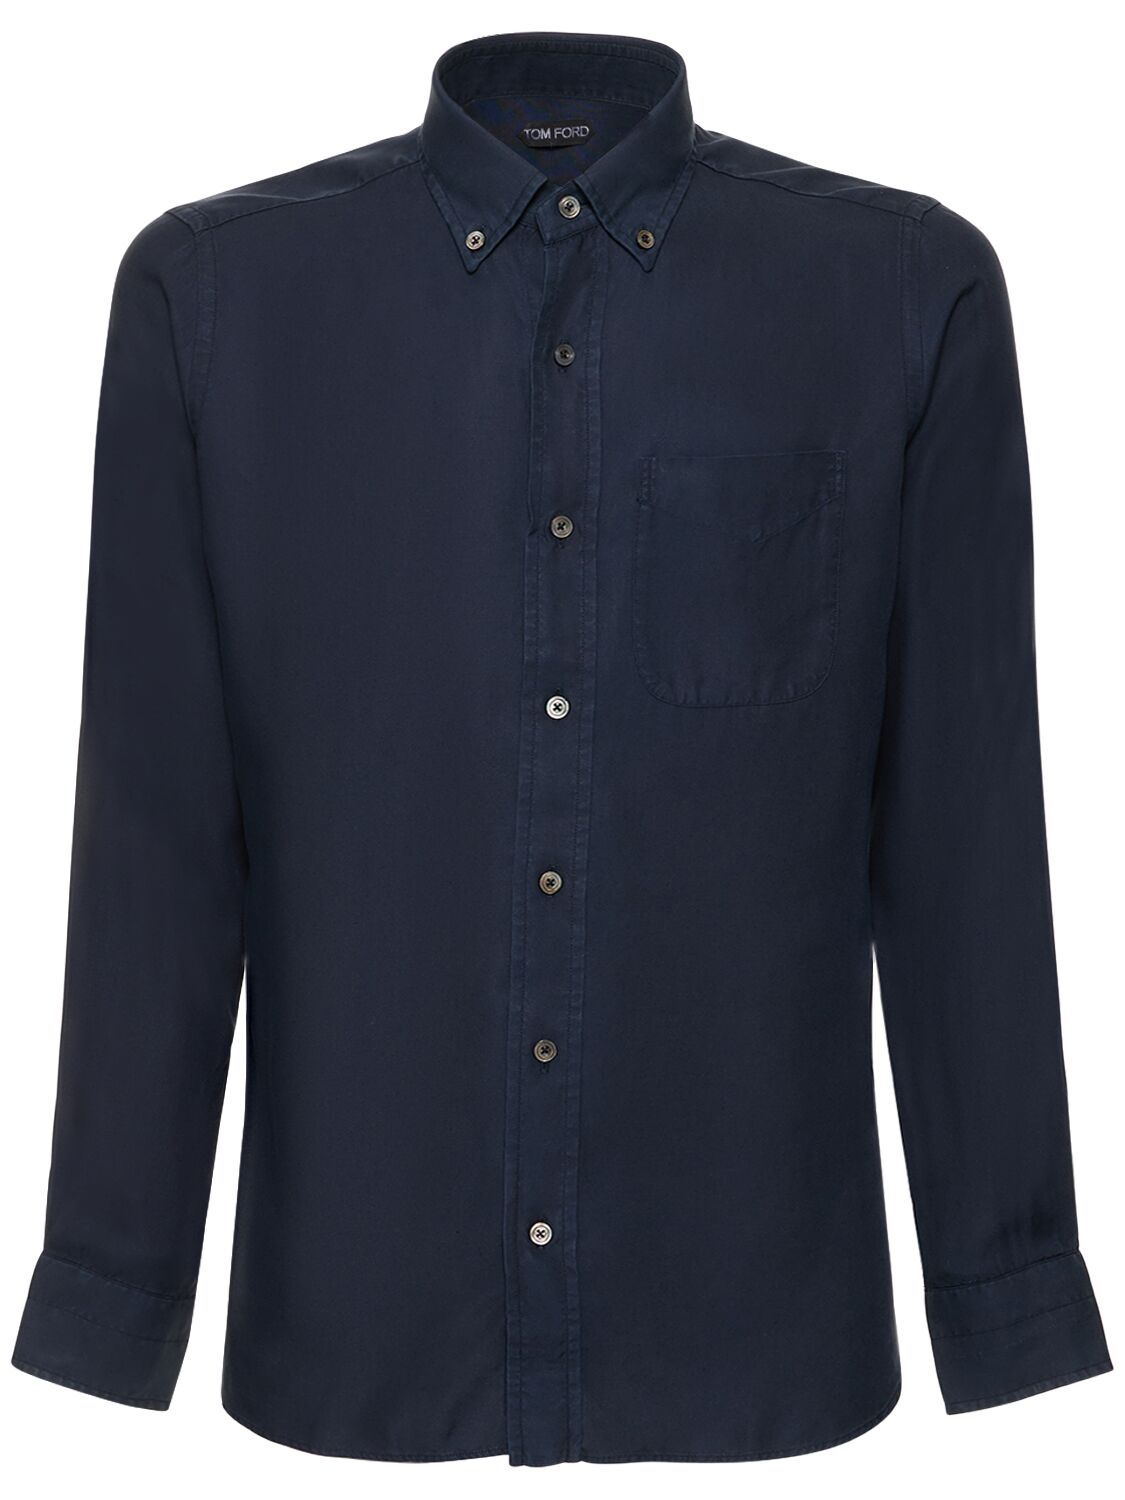 Tom Ford Lyocell Slim Fit Leisure Shirt In Navy